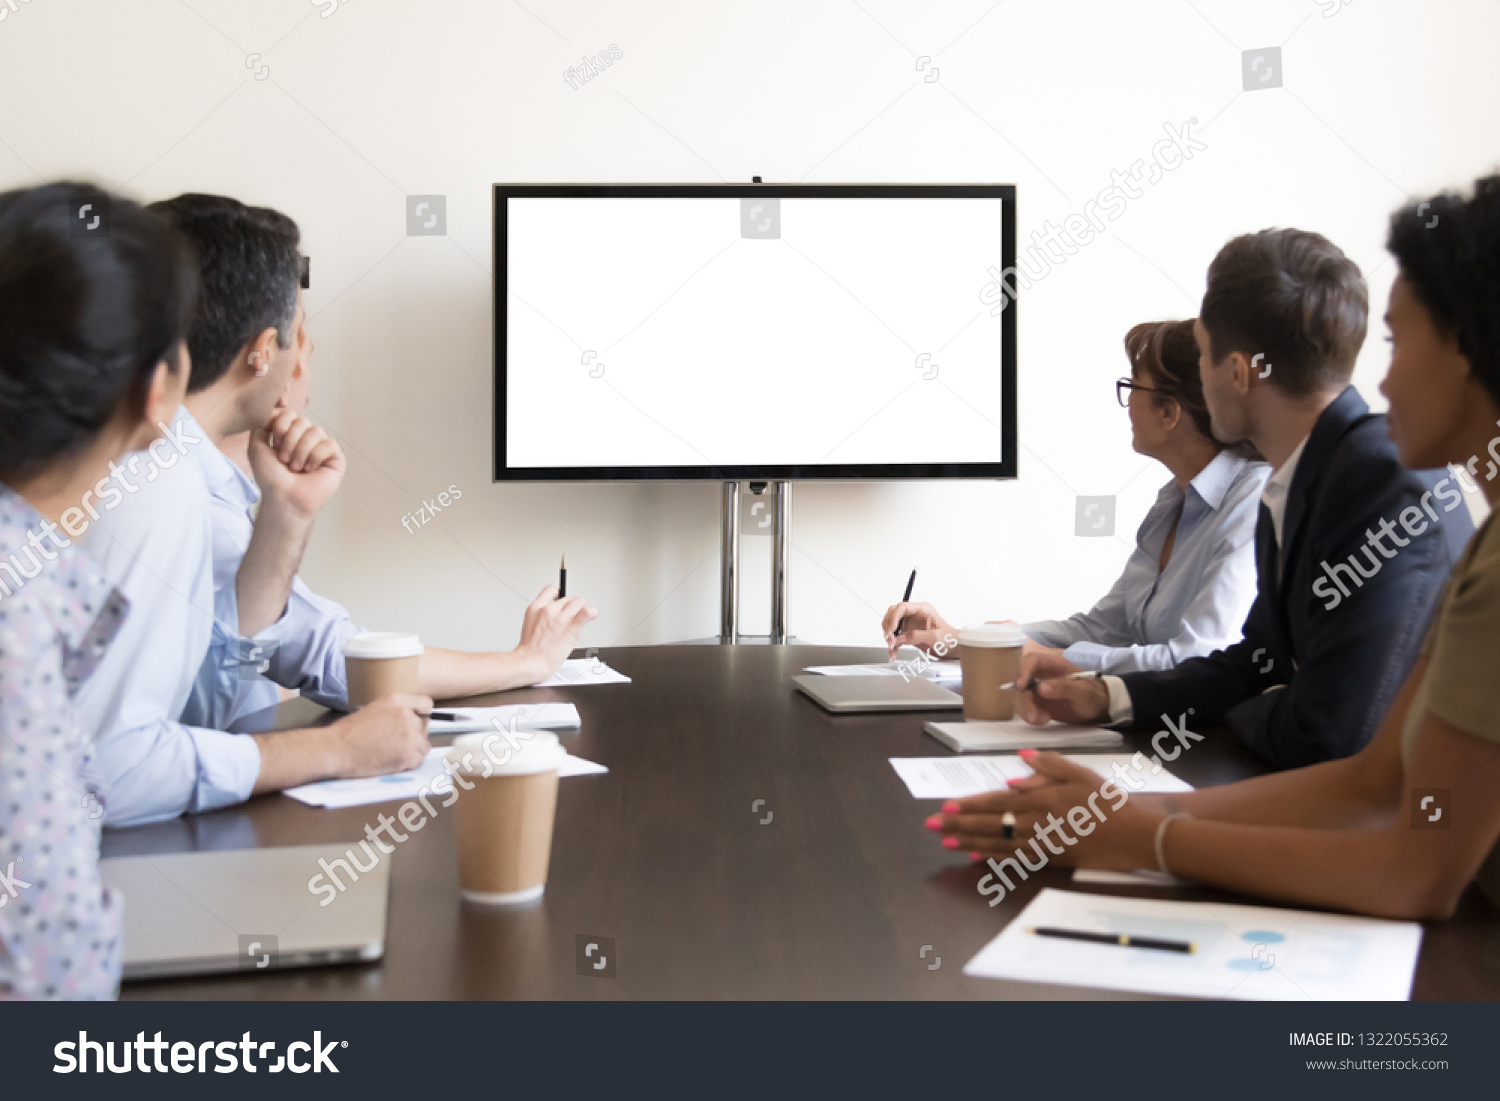 Business executive people group sitting at conference table looking at white blank mockup tv screen on wall watching presentation in meeting room, company training corporate team seminar in boardroom #1322055362